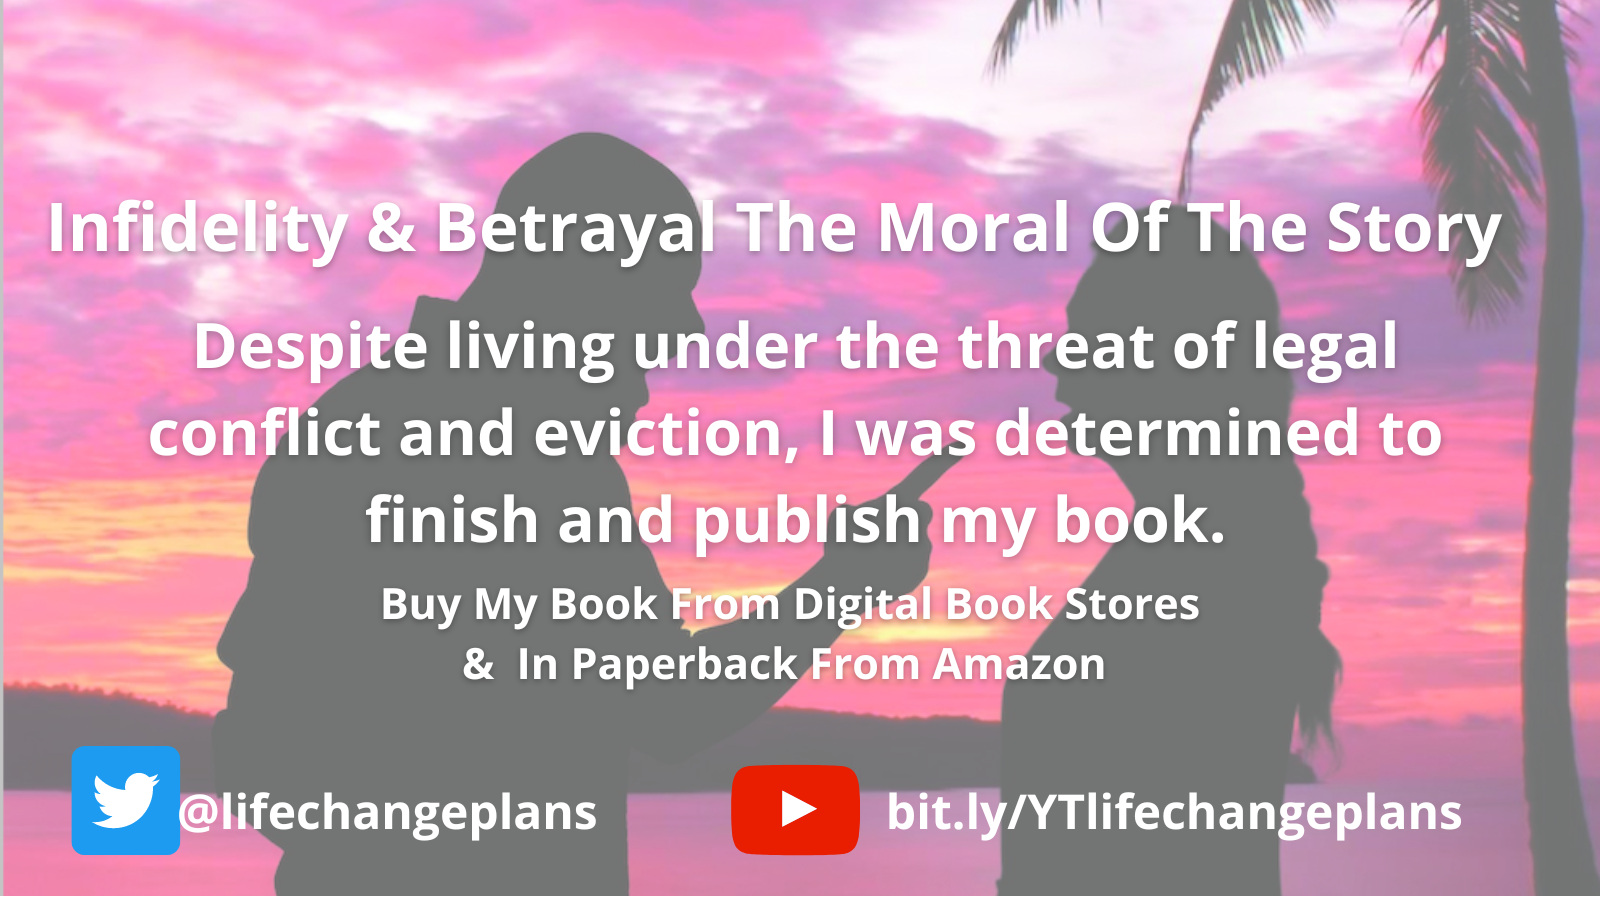 Infidelity & Betrayal The Moral Of The Story